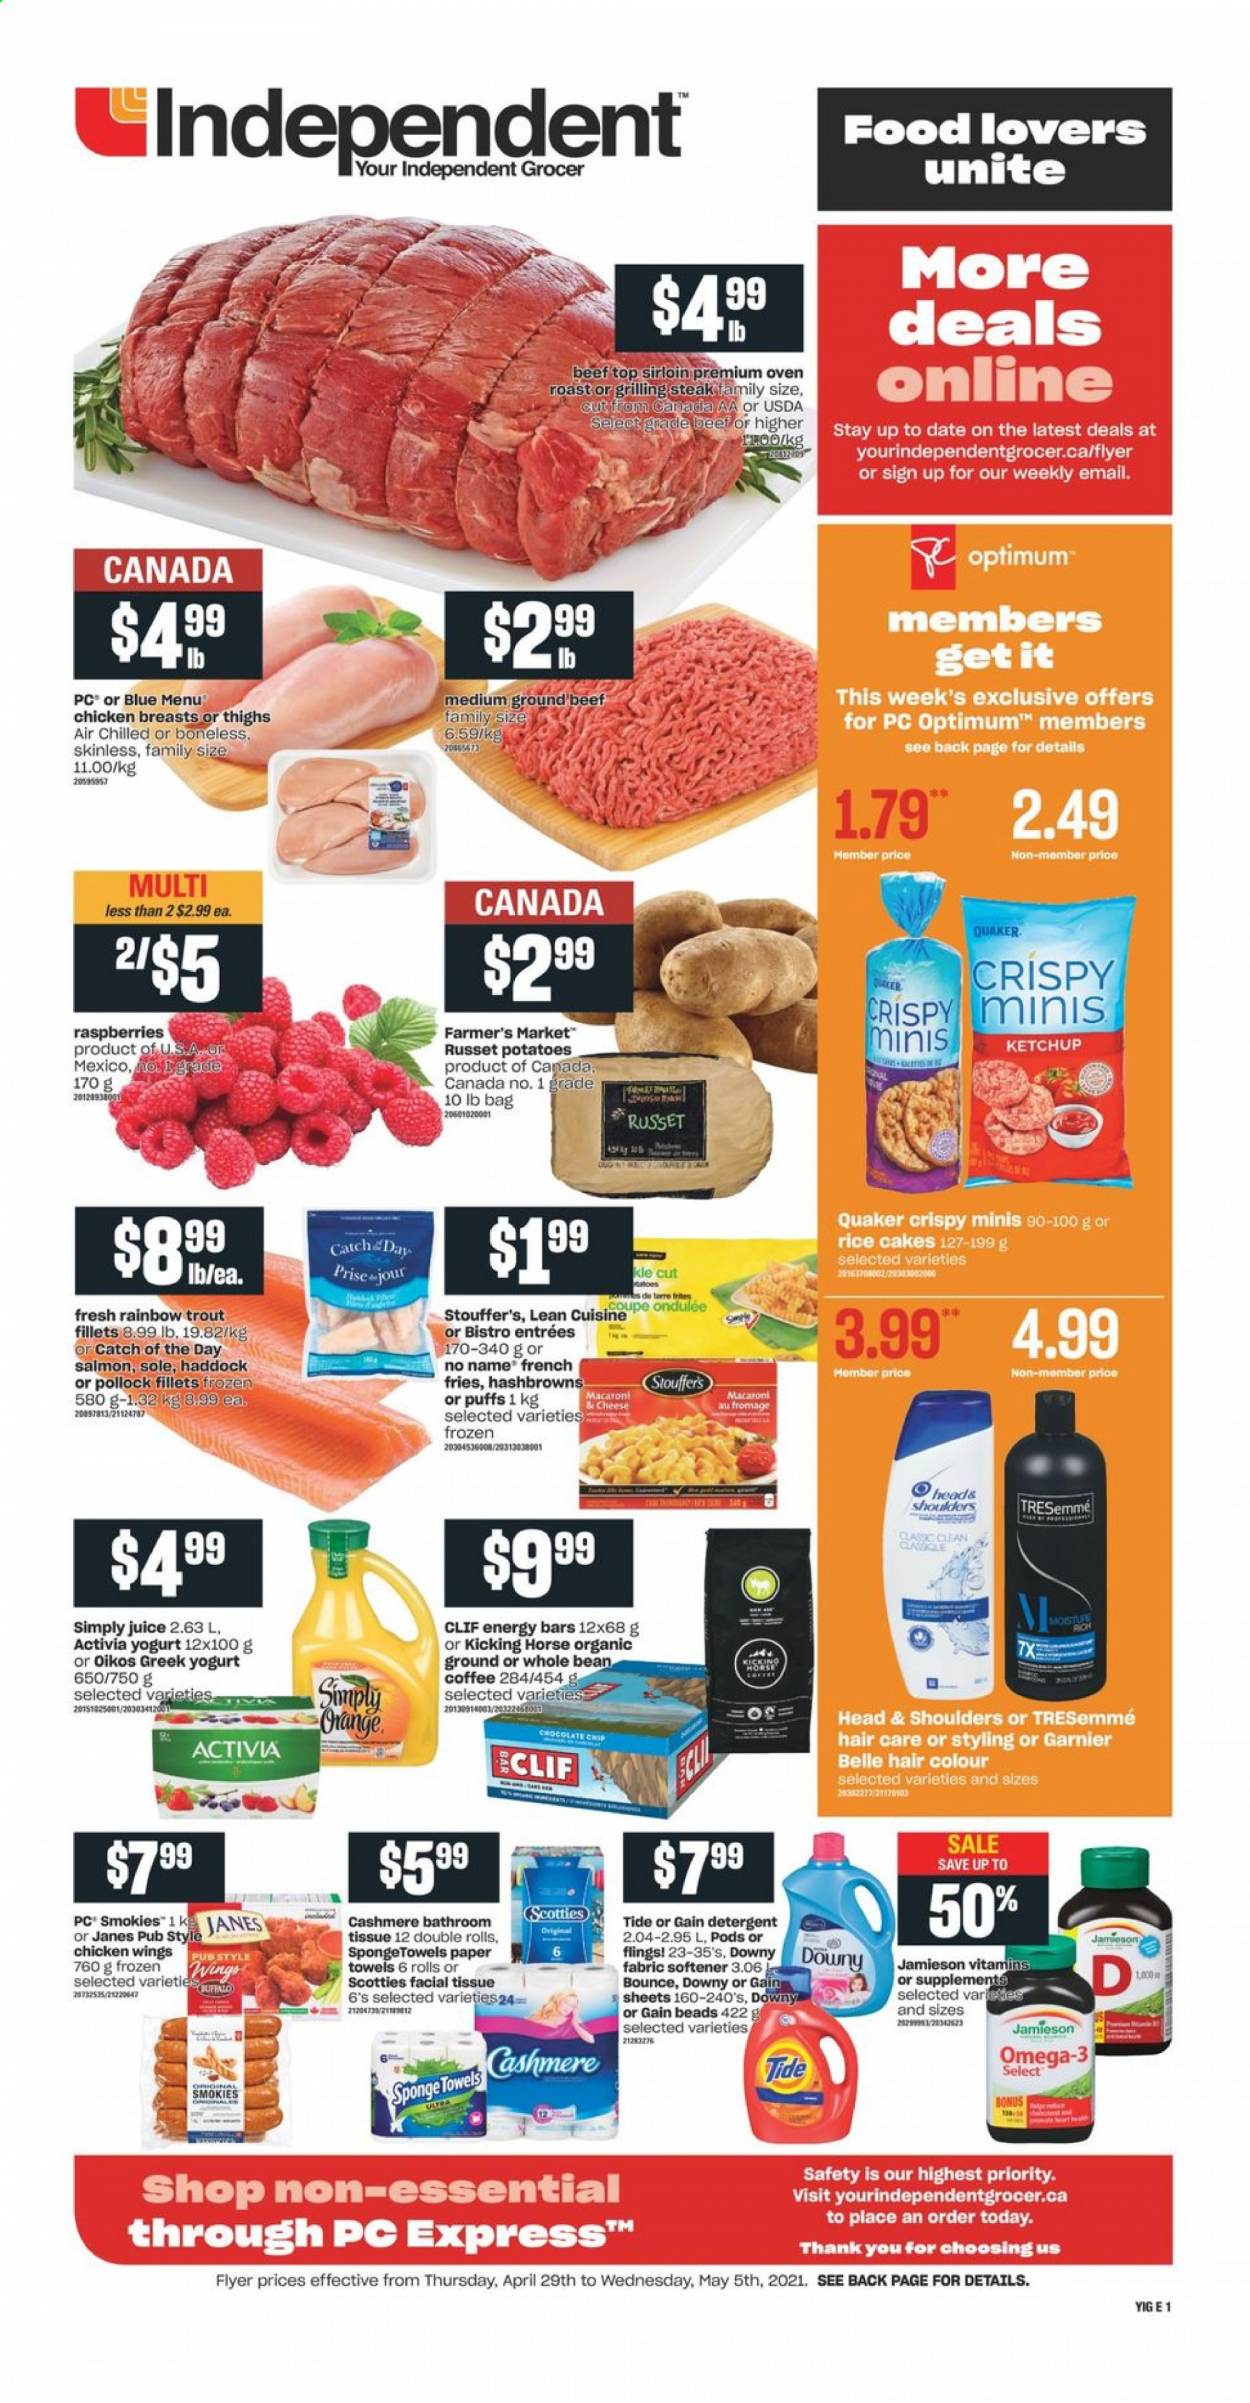 thumbnail - Independent Flyer - April 29, 2021 - May 05, 2021 - Sales products - puffs, russet potatoes, potatoes, salmon, trout, haddock, pollock, No Name, macaroni & cheese, Quaker, Lean Cuisine, greek yoghurt, yoghurt, Activia, Oikos, chicken wings, Stouffer's, hash browns, potato fries, energy bar, juice, coffee, chicken breasts, beef meat, ground beef, tissues, kitchen towels, paper towels, Gain, Tide, fabric softener, Bounce, Downy Laundry, TRESemmé, hair color, sponge, Optimum, Omega-3, Garnier, Head & Shoulders, steak. Page 1.